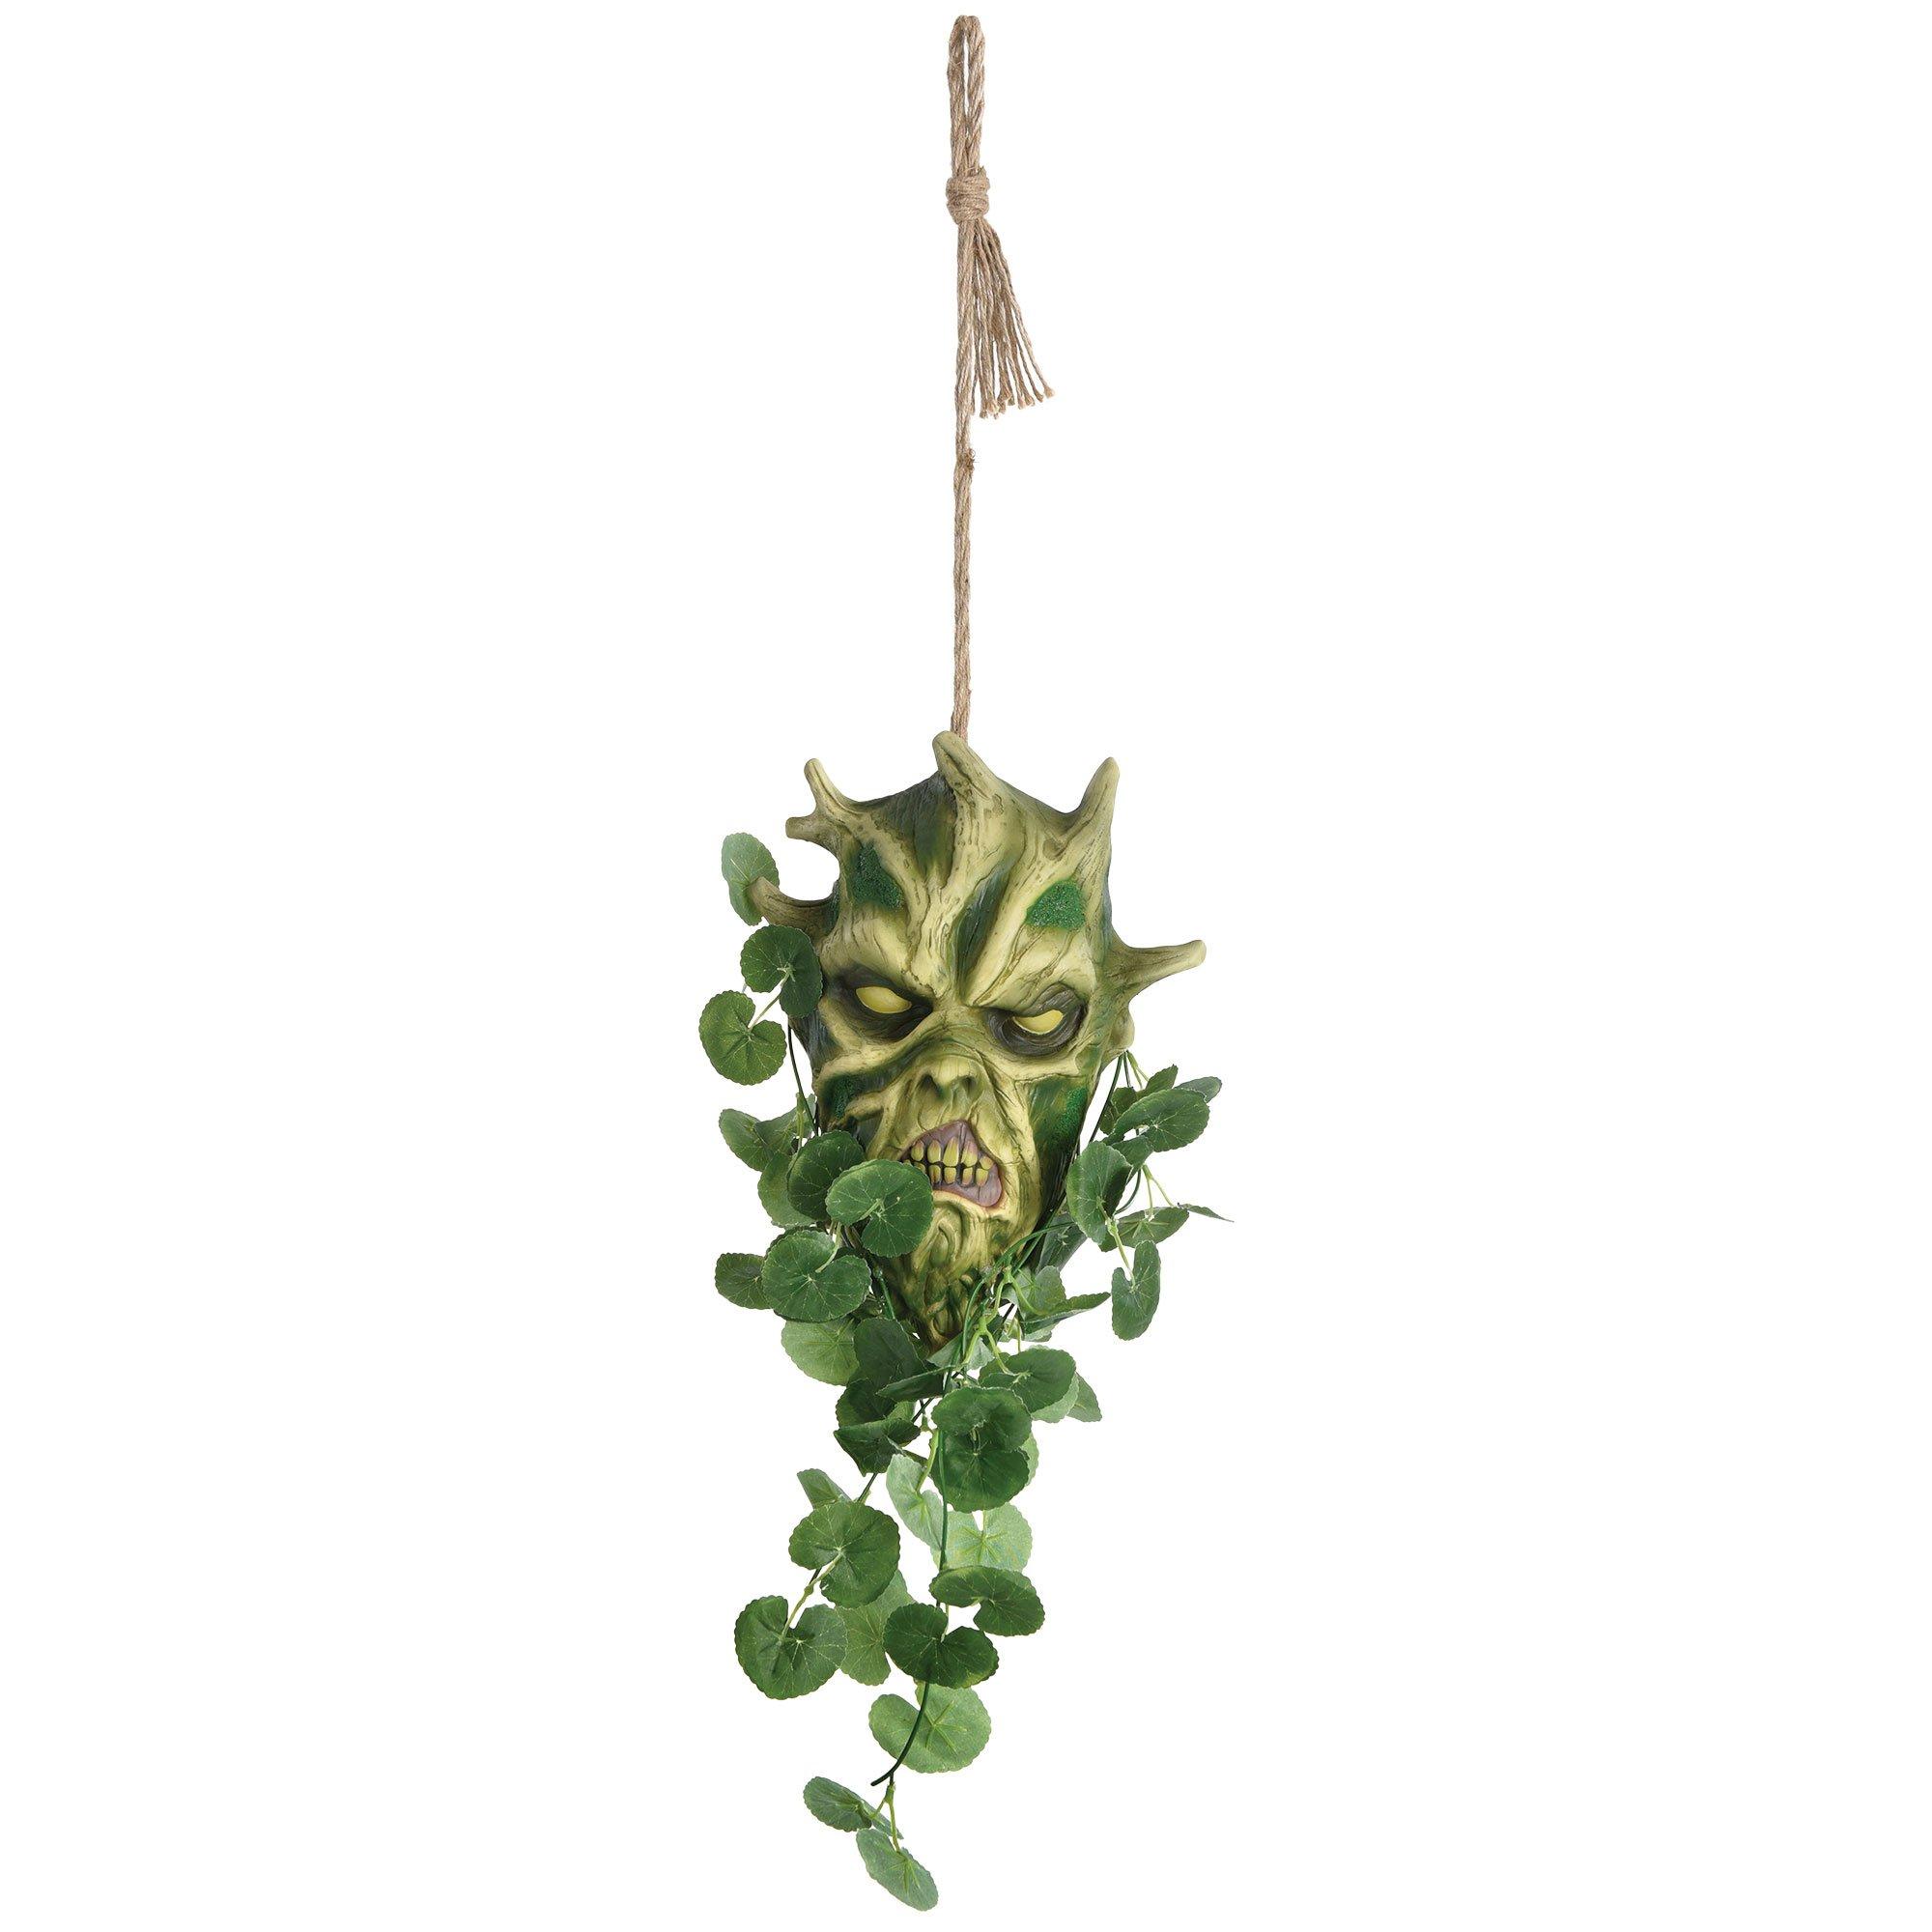 Glow-in-the-Dark Mutated Forest Head Hanging Decoration, 24in